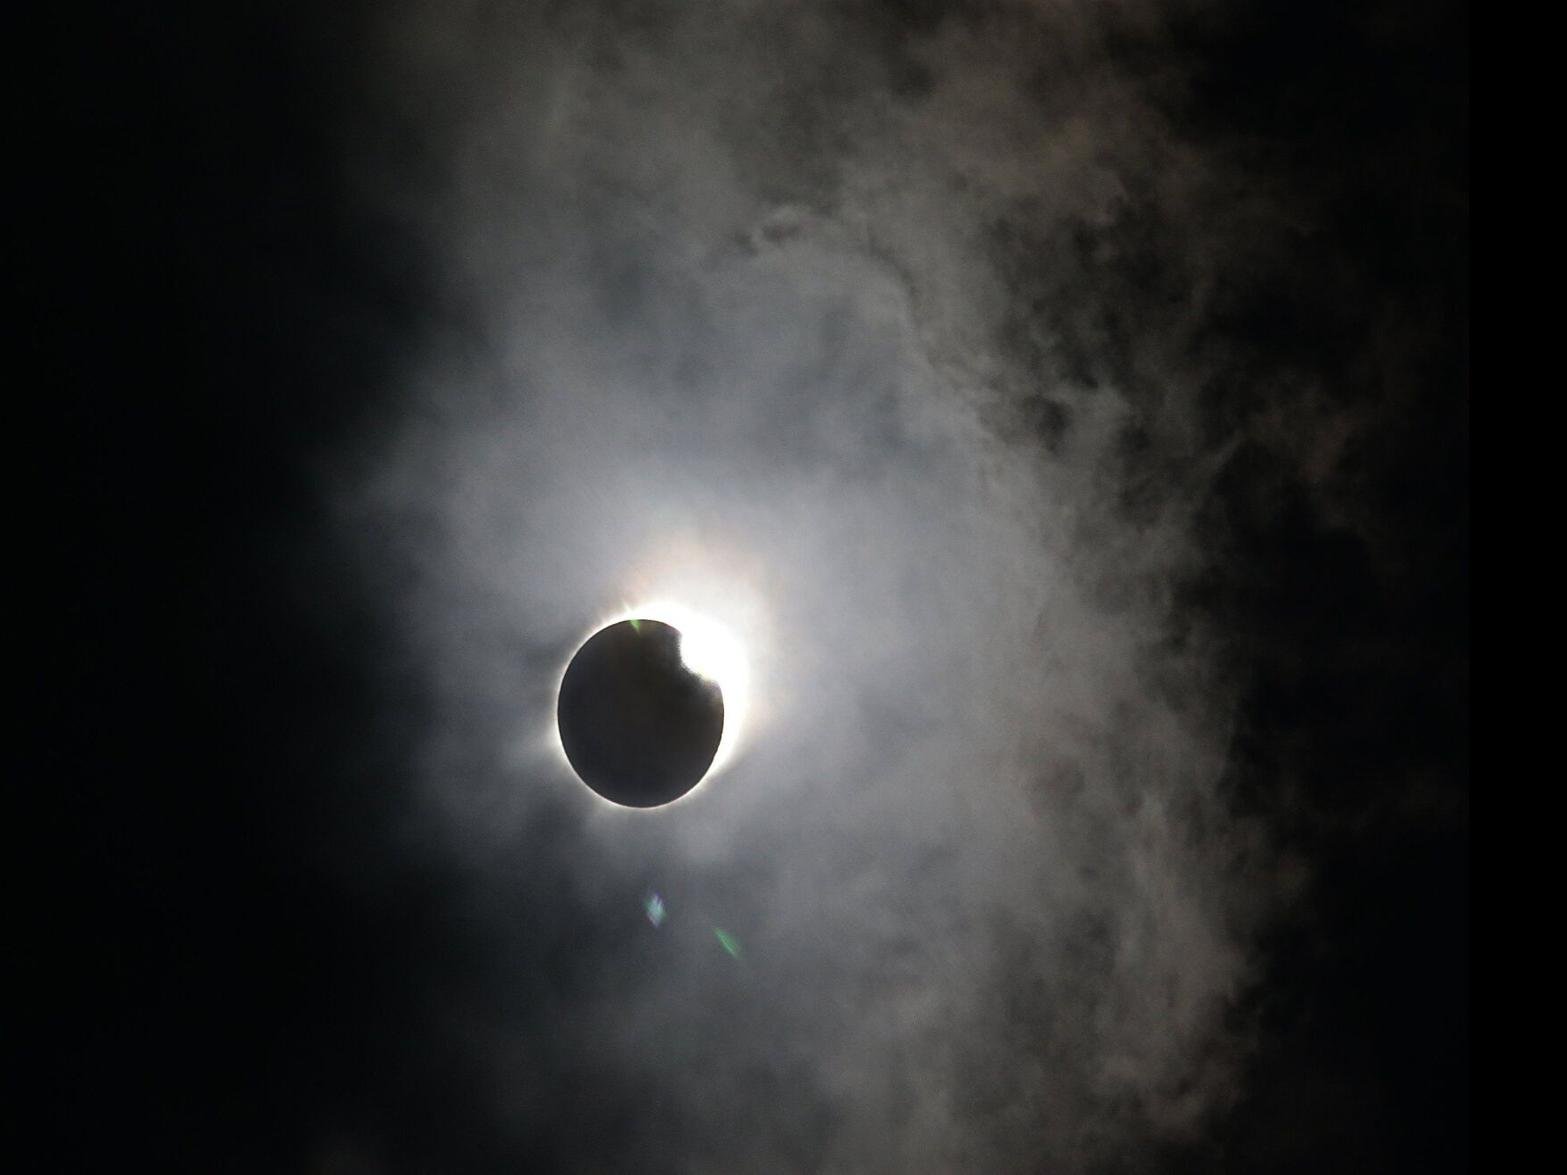 You'll probably be dead before Michigan's next total solar eclipse